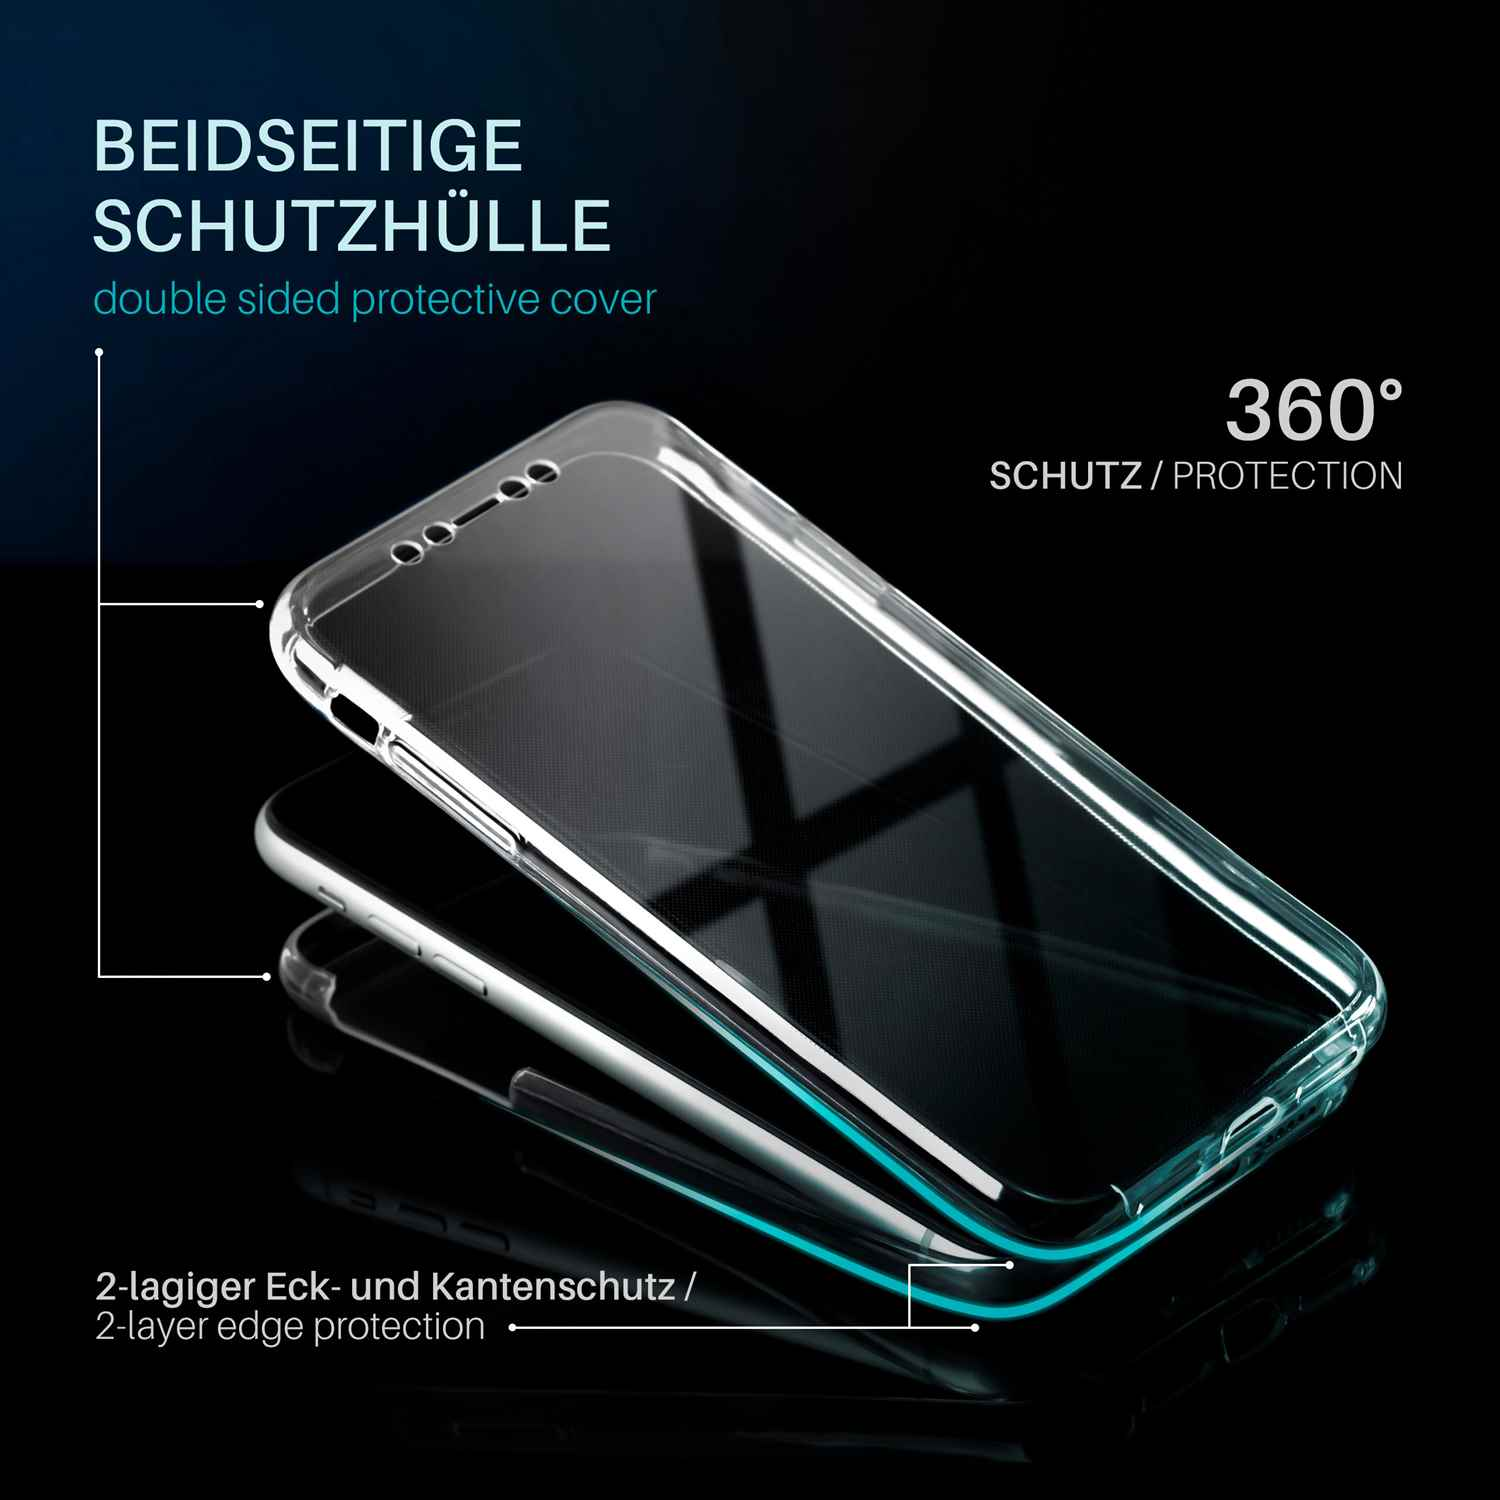 MOEX Double 5G, Full S20 Galaxy Cover, Case, Ultra Crystal Samsung